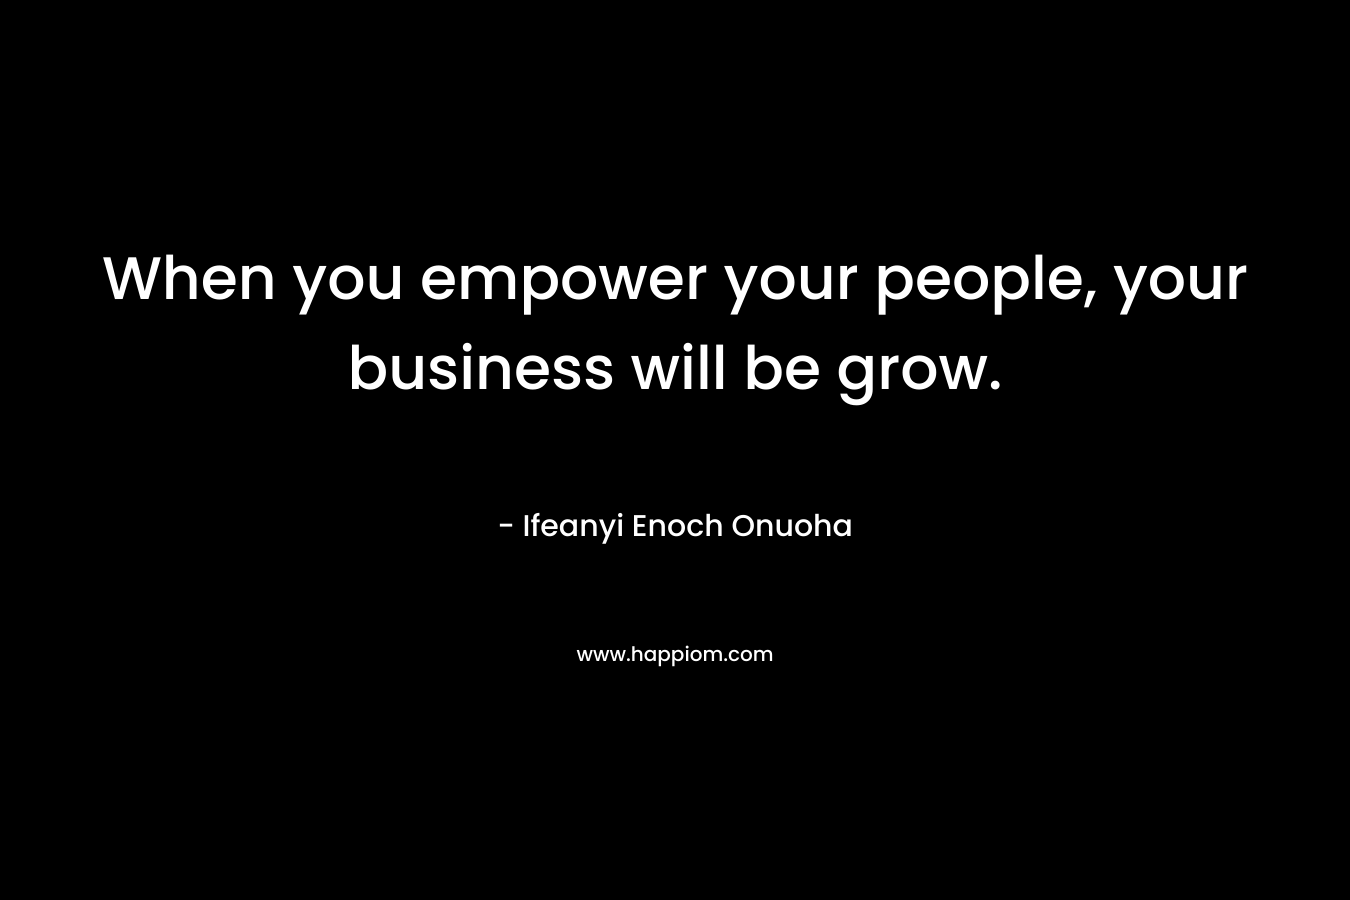 When you empower your people, your business will be grow.